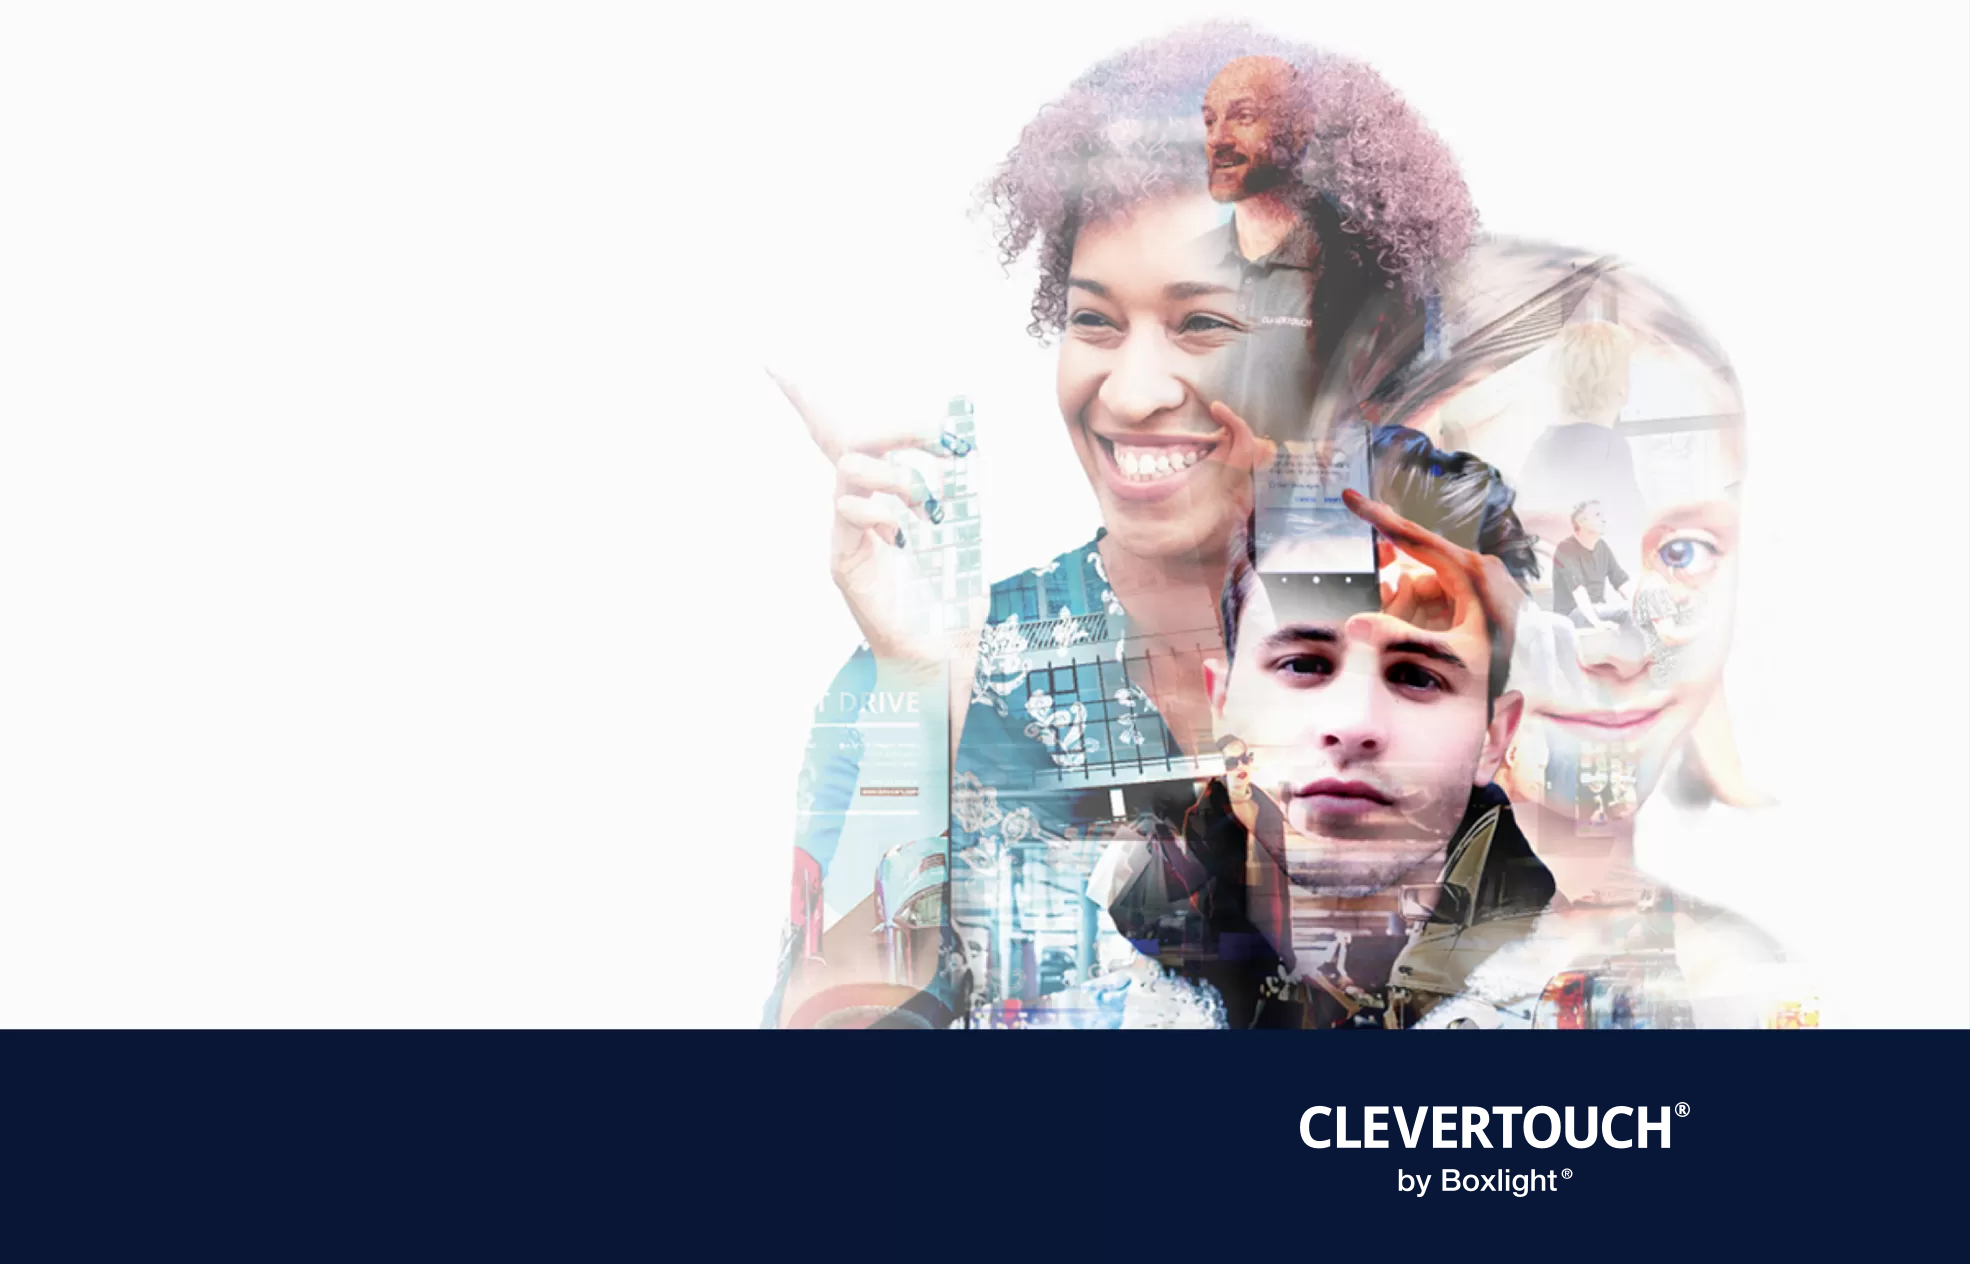 a montage of people with a navy banner with the clevertouch logo along the bottom